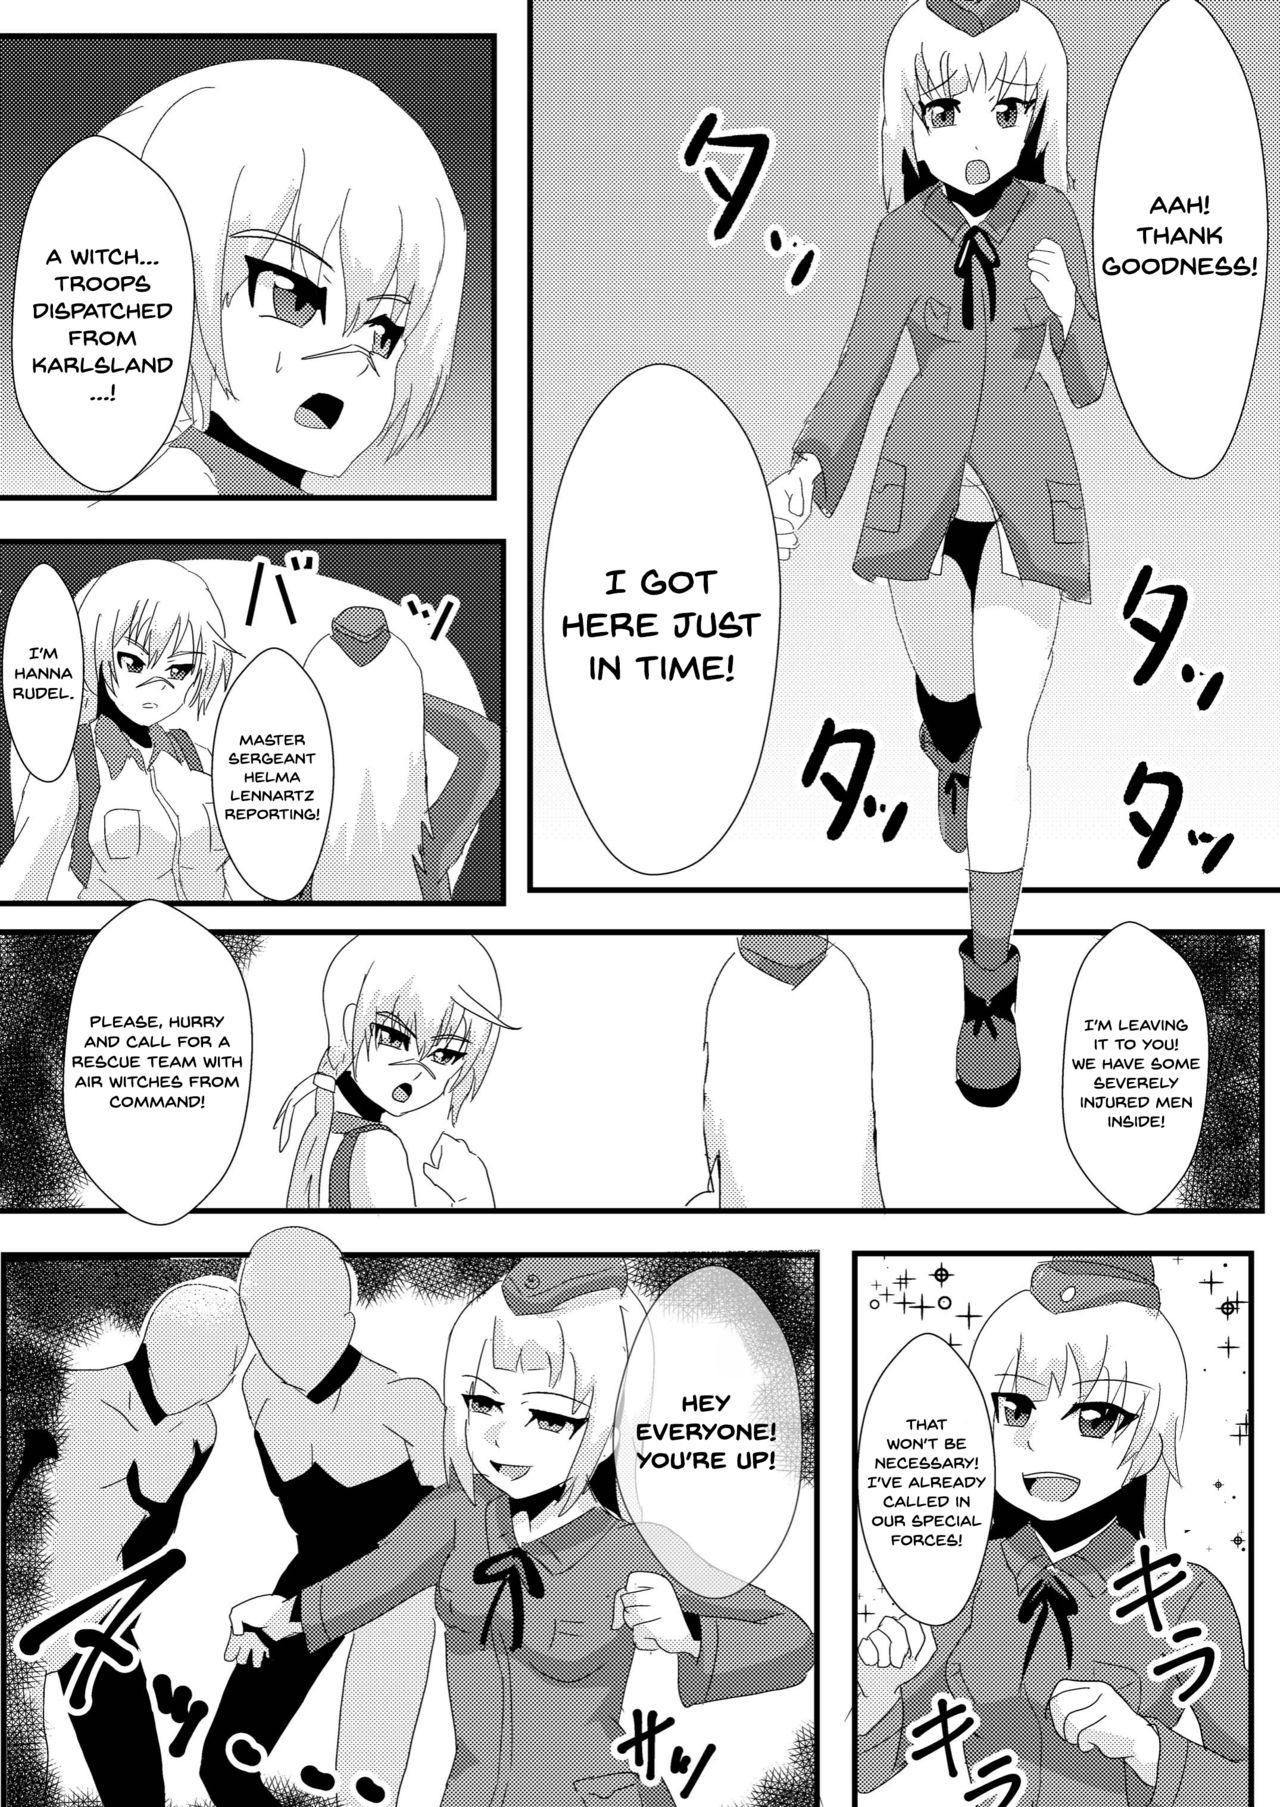 Pegging Parasite Witches 2 - Strike witches Korea - Page 7